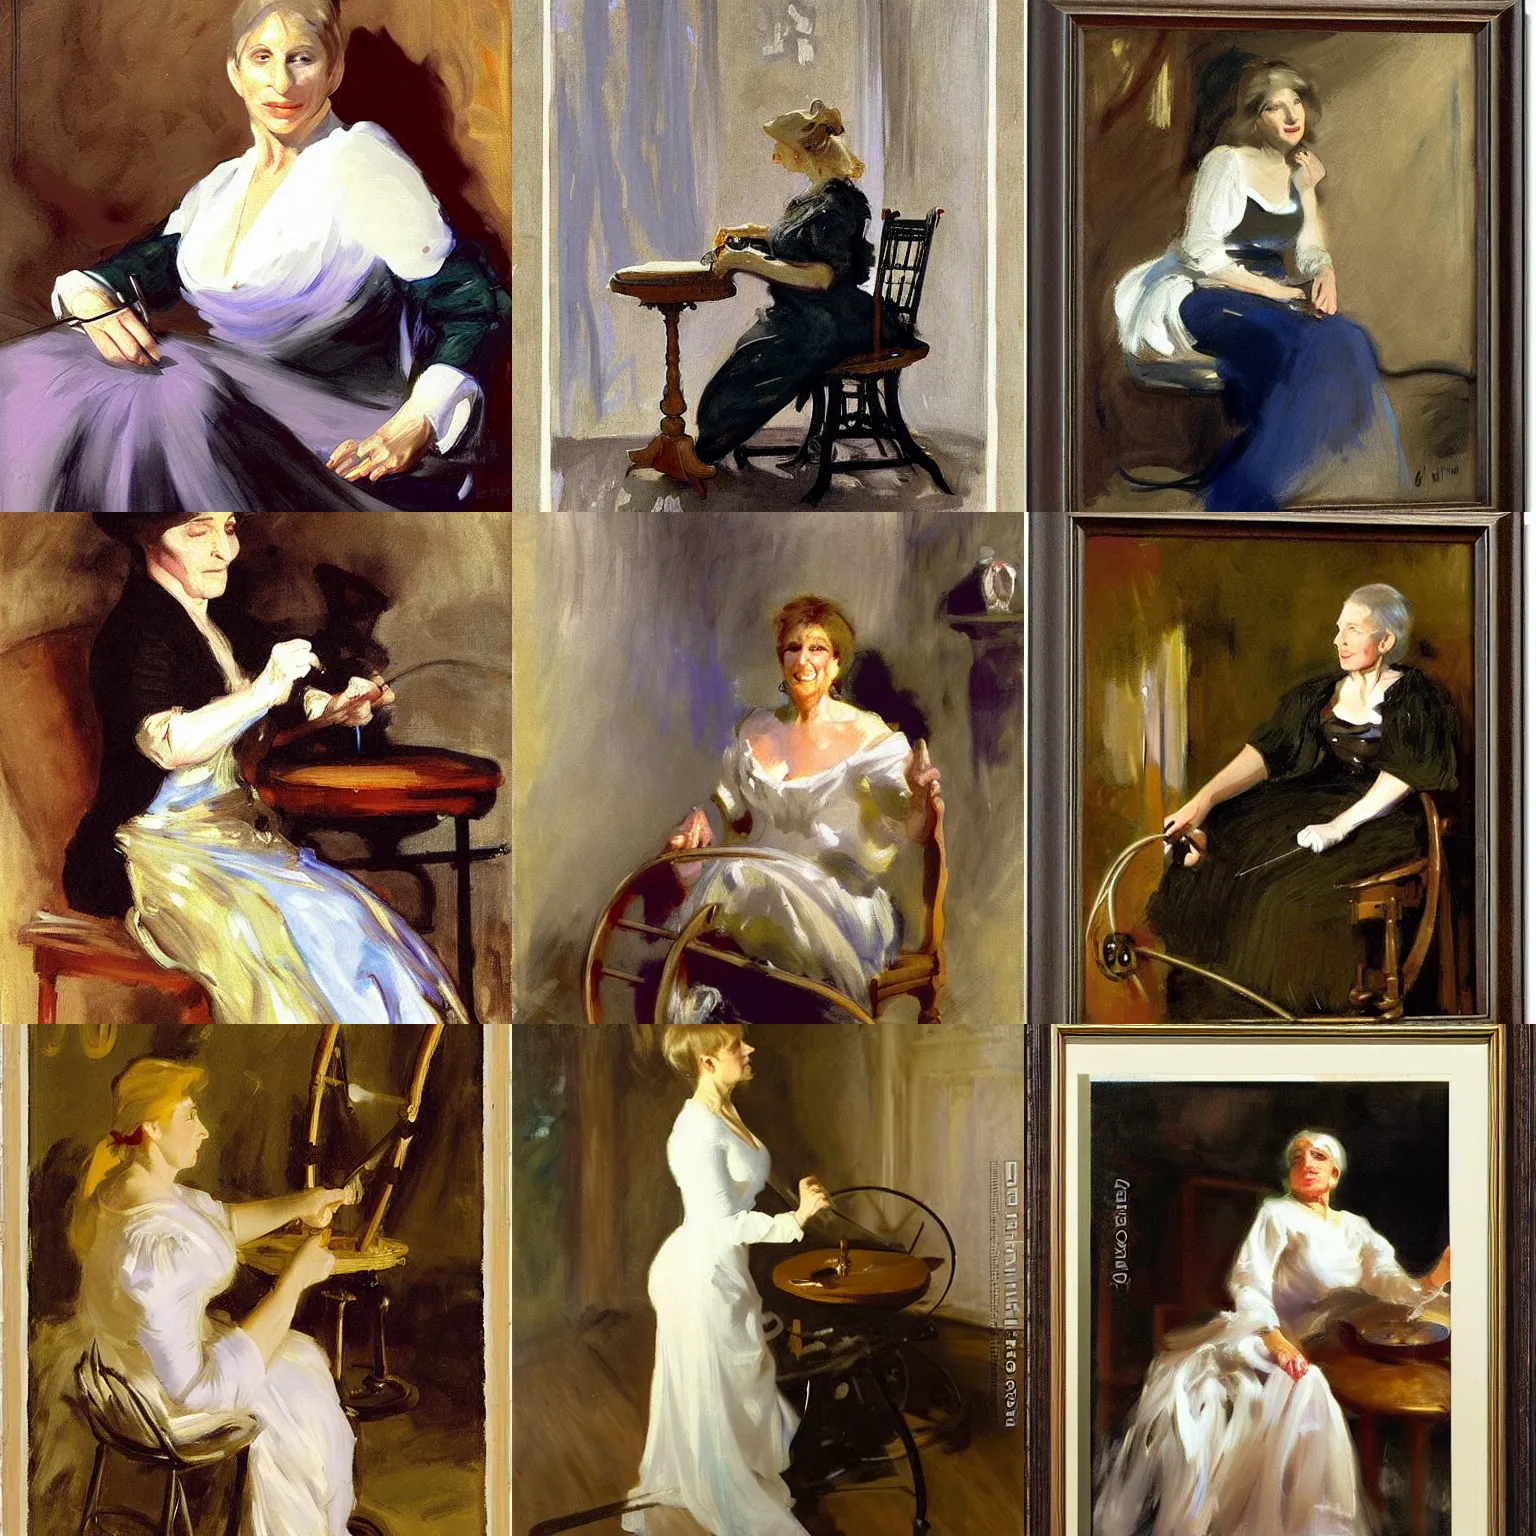 Prompt: A 50 year old woman who looks like Barbara Streisand is spinning yarn on a spinning wheel, by john singer sargent